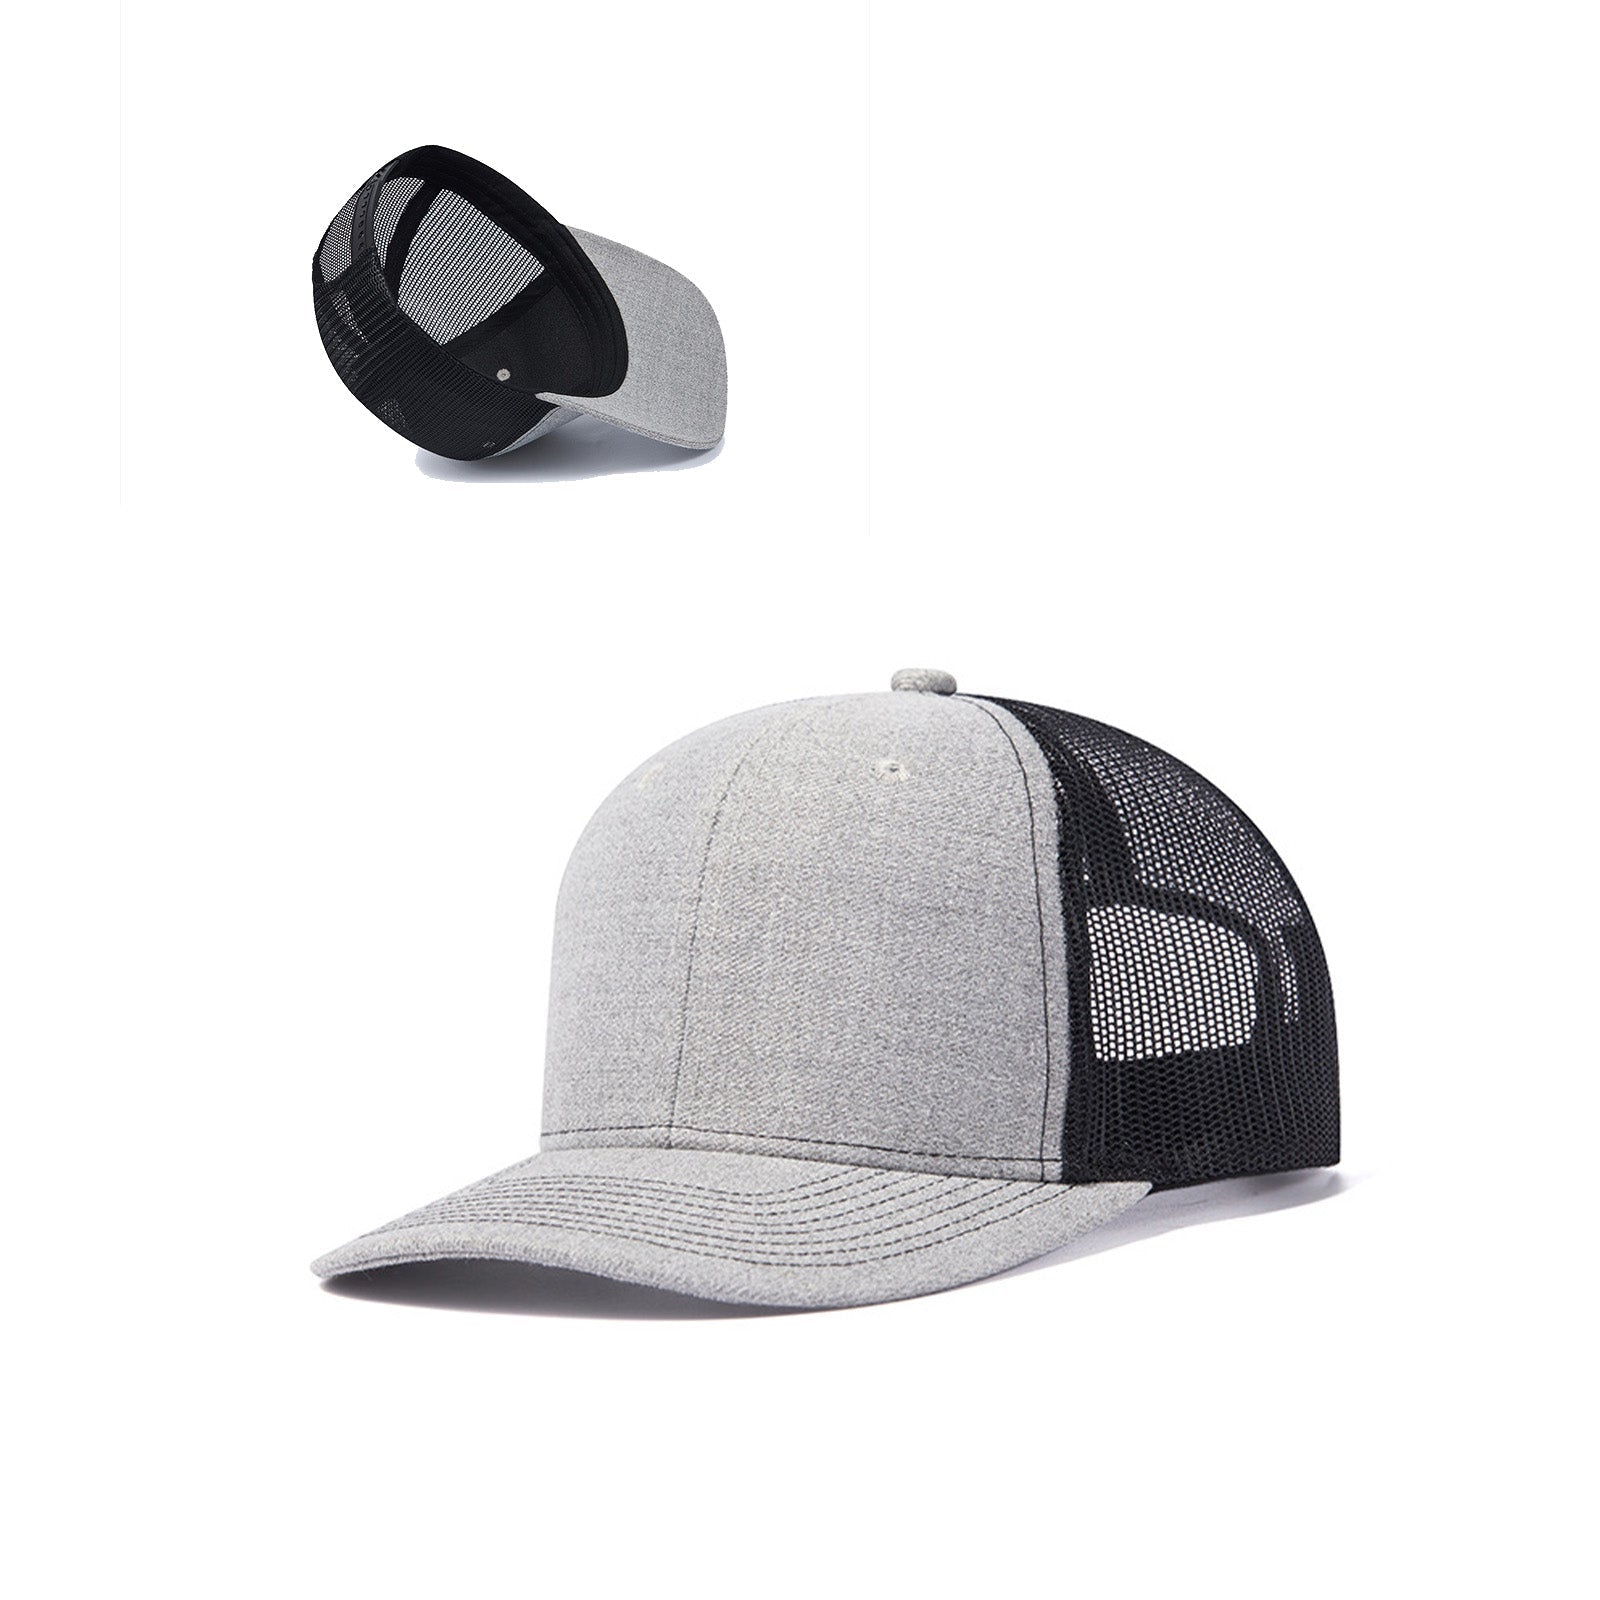 A gray baseball cap with a black mesh back. The cap features a curved brim and an adjustable snapback closure, perfect for outdoor crafts. Inset image shows the back view of the cap. This is the "2 pcs Adjustable Men Mesh Trucker Hat with 4pcs Self-adhesive Cap Stickers for Laser Engraving" by CrealityFalcon.